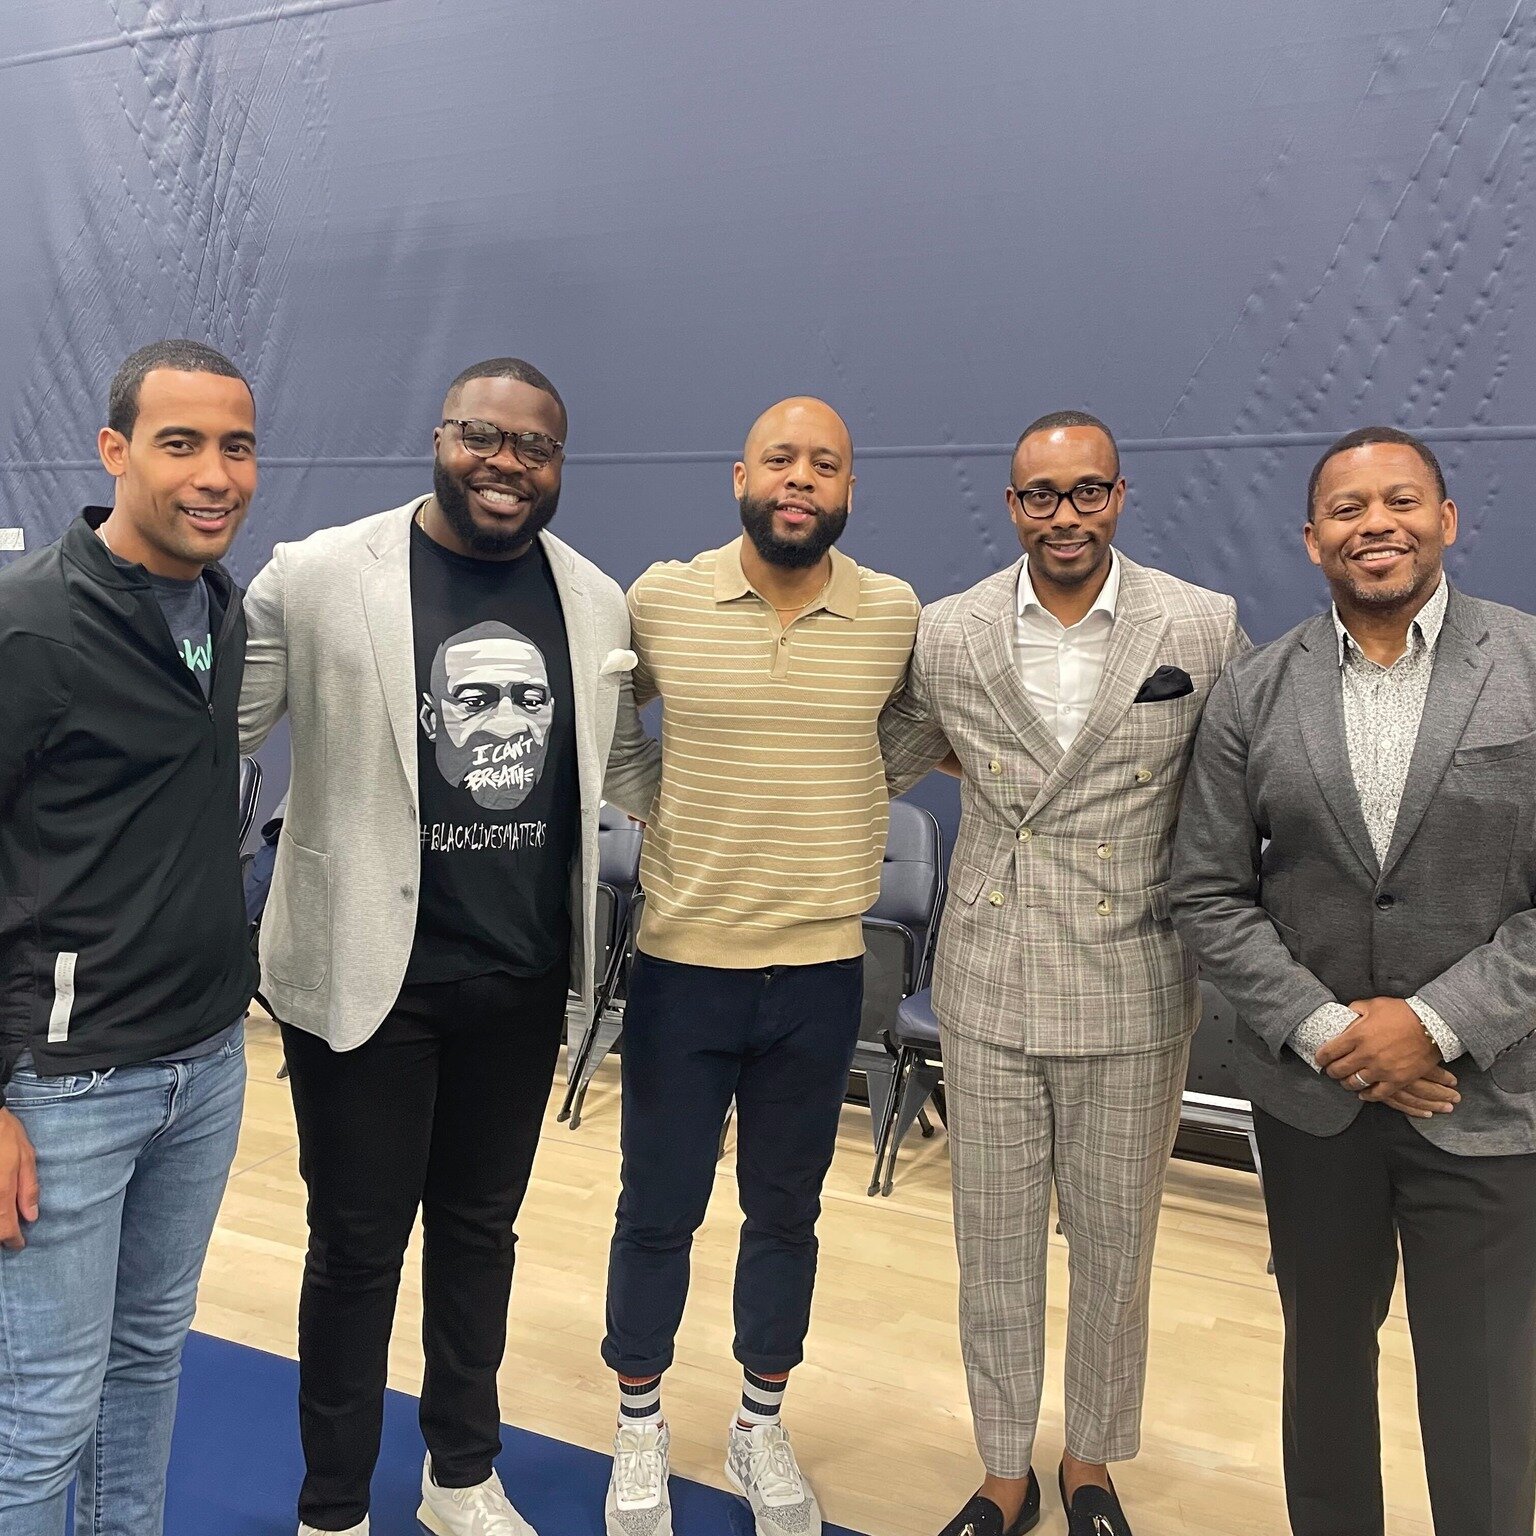 We are honored to have been able to show up for, connect with and support the community of Minneapolis, particularly last week for the Money Matters Financial Wellness panel. For us, bridging the racial wealth gap and helping our community generate w